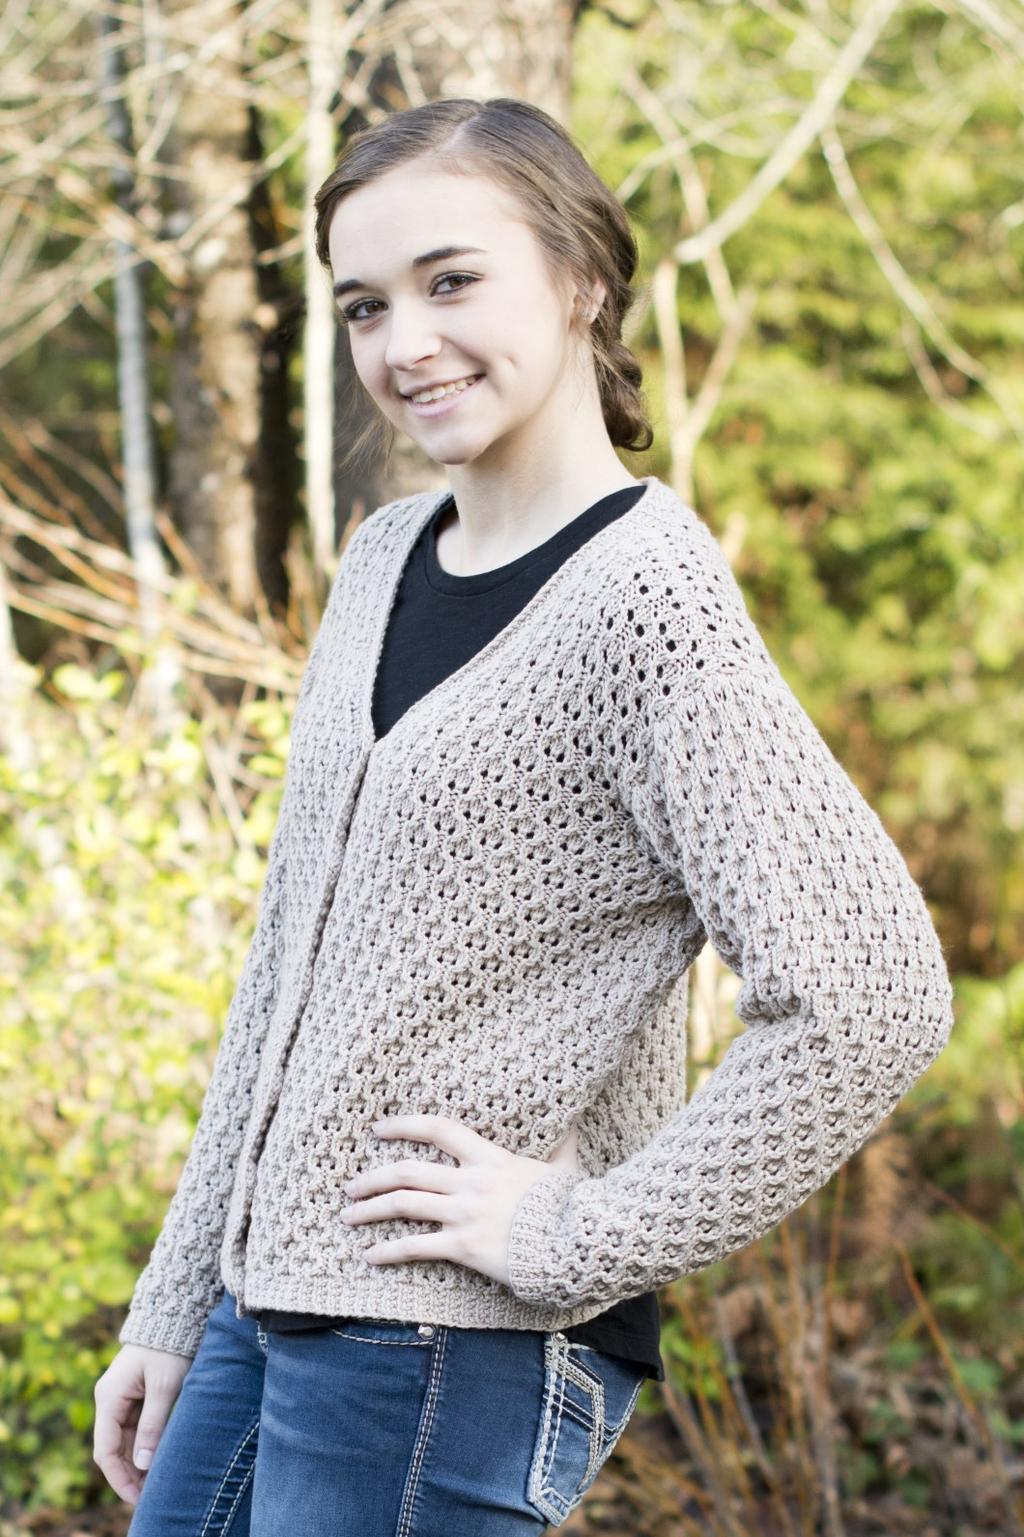 Anchor Bay Lace Cardigan Designed by Cheryl Beckerich Skill Level: Sizes: Intermediate xs (s, m, l, xl, xxl) Finished Dimensions: 33 (36, 39, 42, 45, 48) Materials: Cascade Yarns Anchor Bay 50%